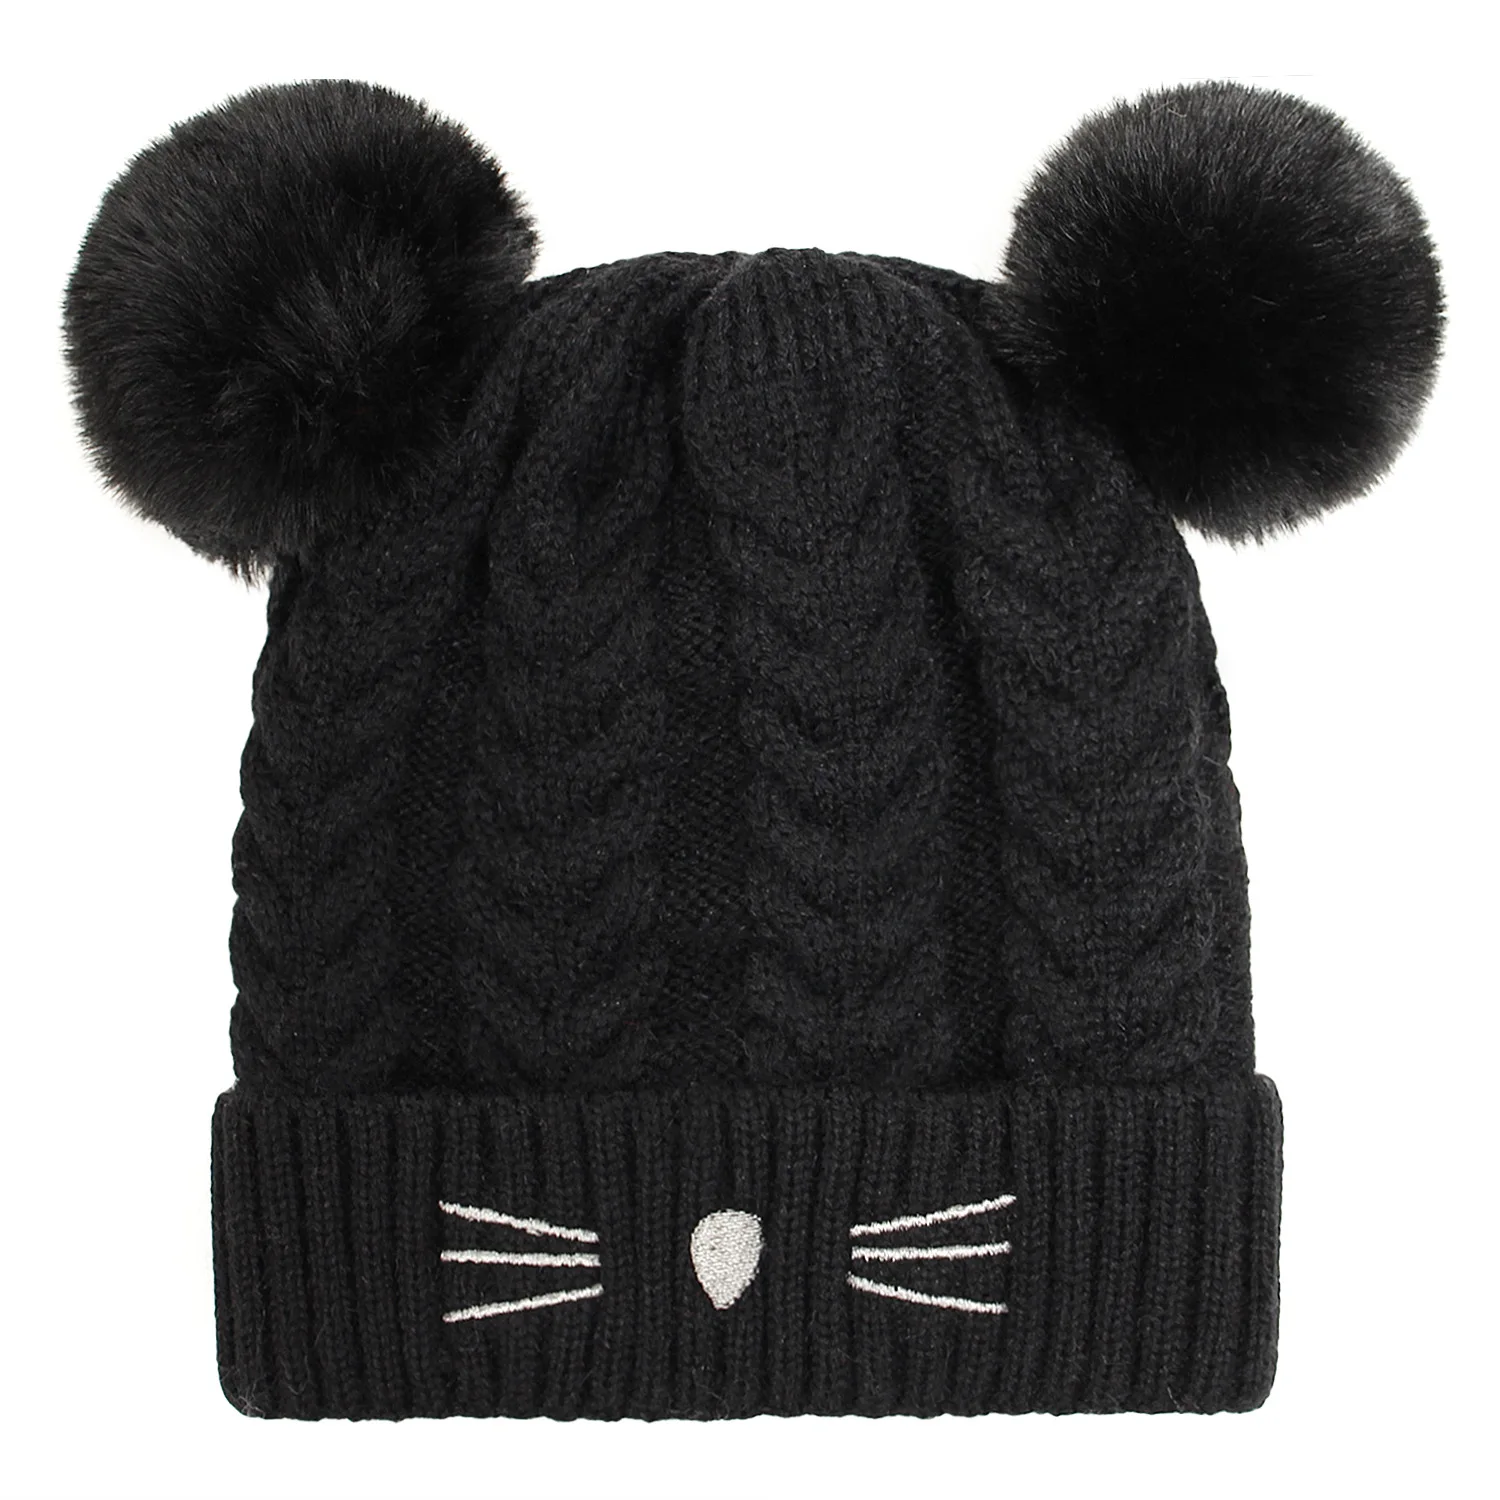 aby Winter Hat Knitted Warm Cap for Boy Baby Scarves Newborn Cartoon Caps for Girls Cute Cat Ear Baby Beanie images - 6